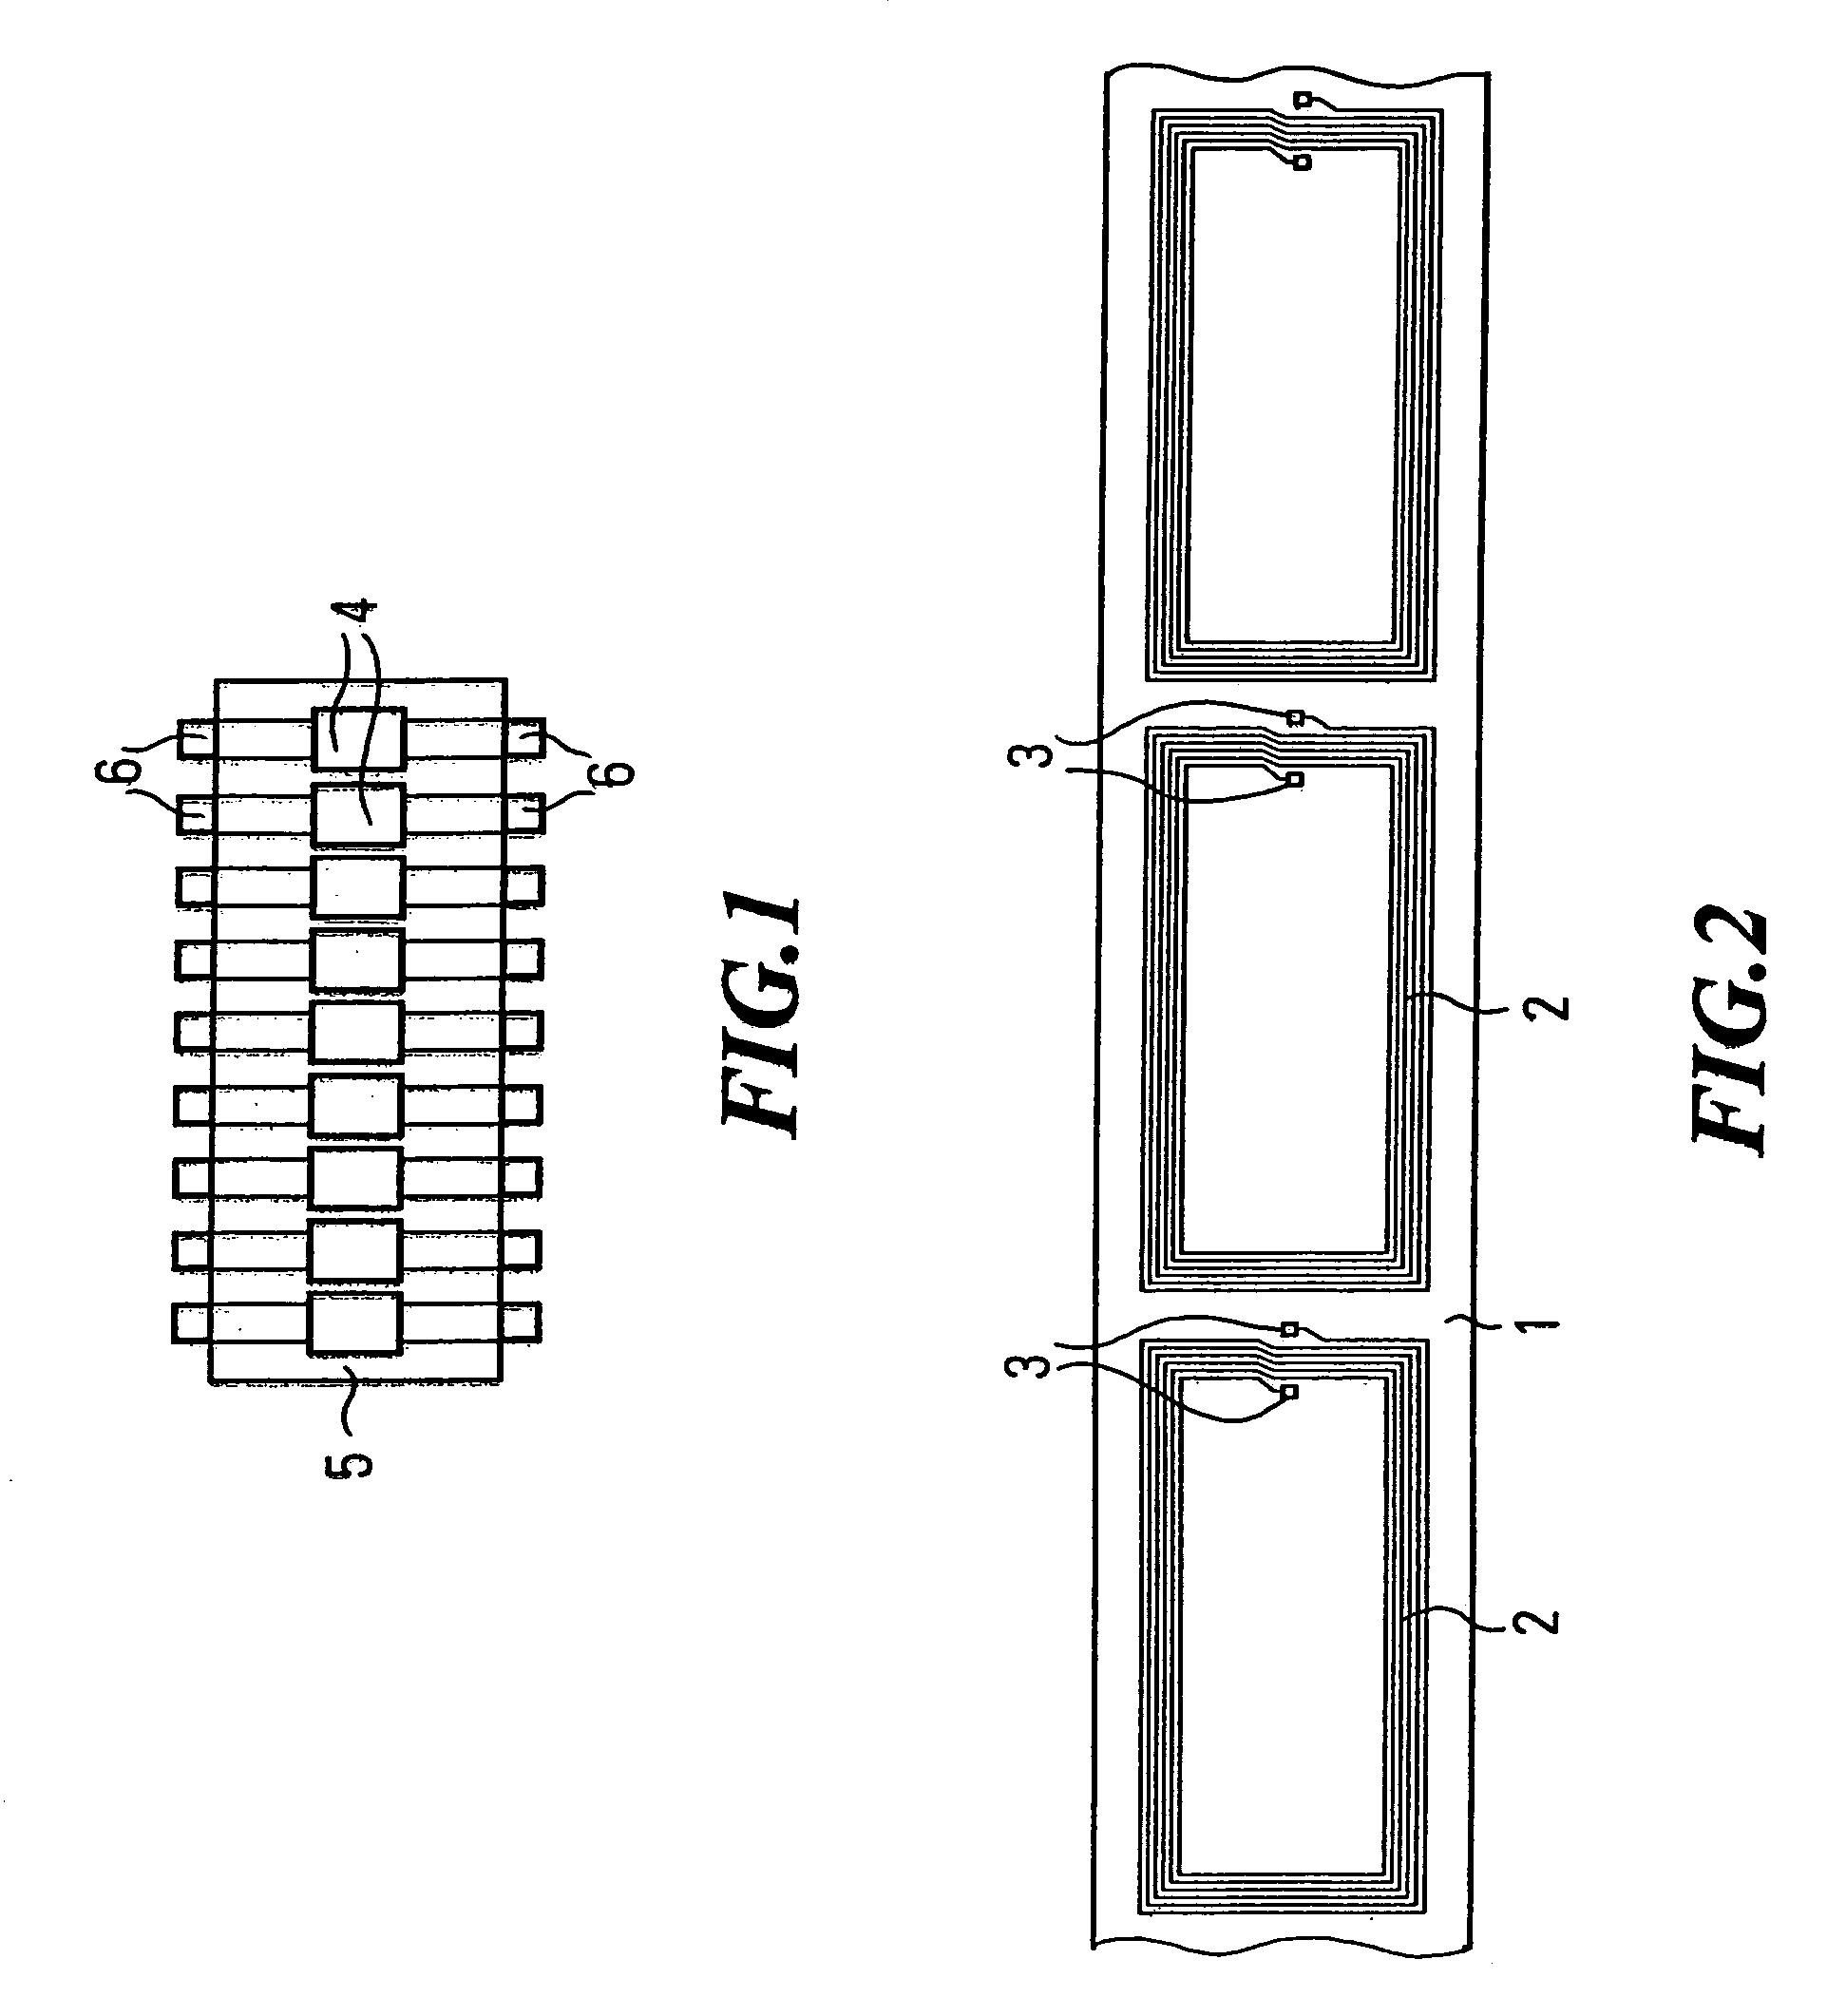 Method for connecting microchips to an antenna arranged on a support strip for producing a transponder